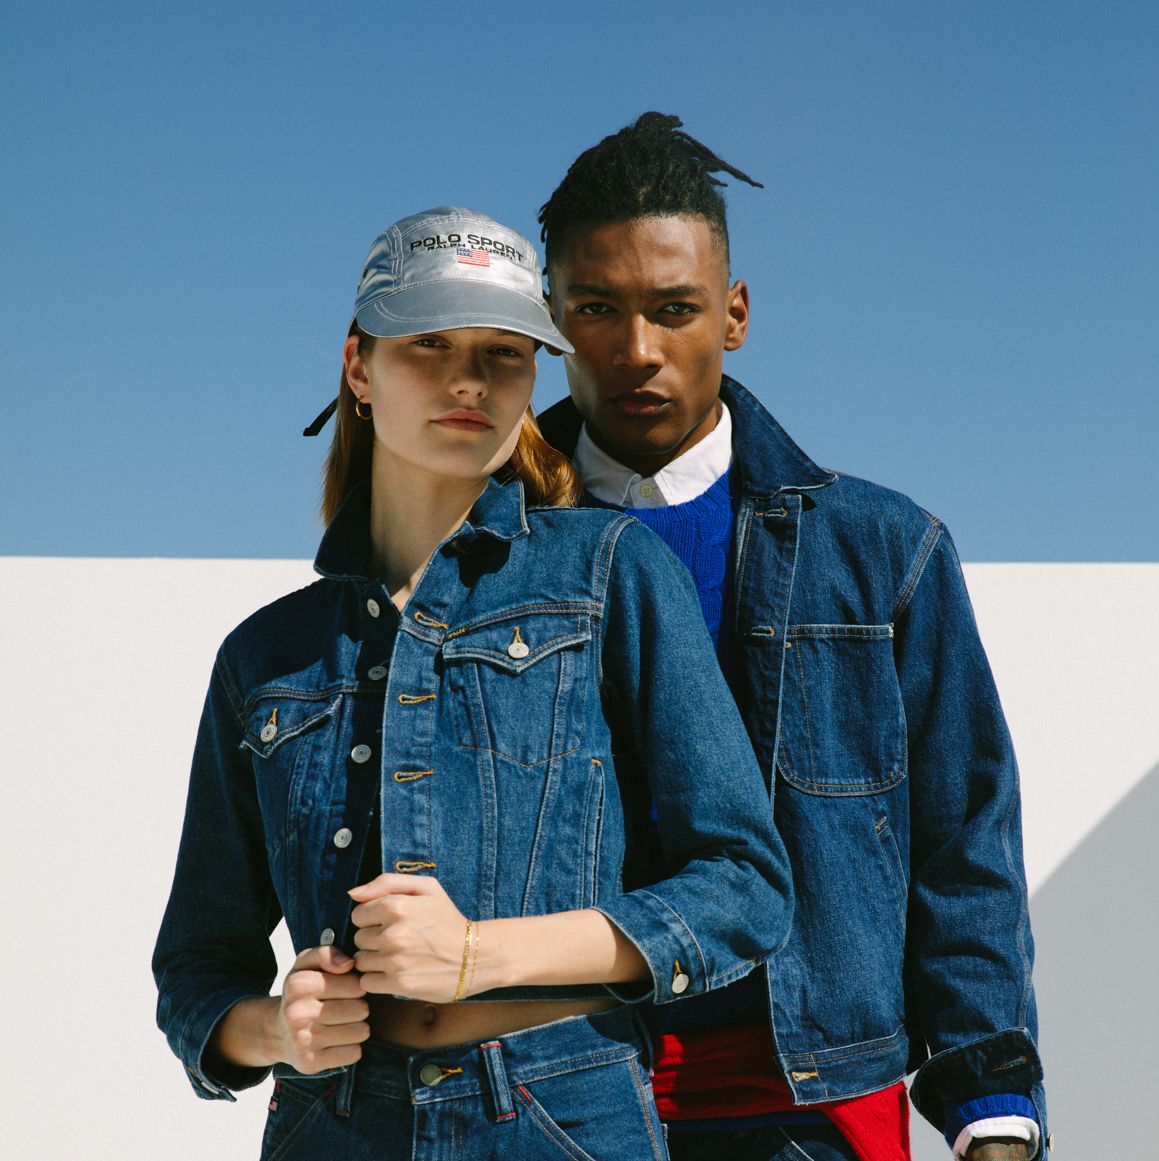 Ralph Lauren Is Bringing Back the Polo Sport Collection - Polo Sport Denim  and Silver Launch Date